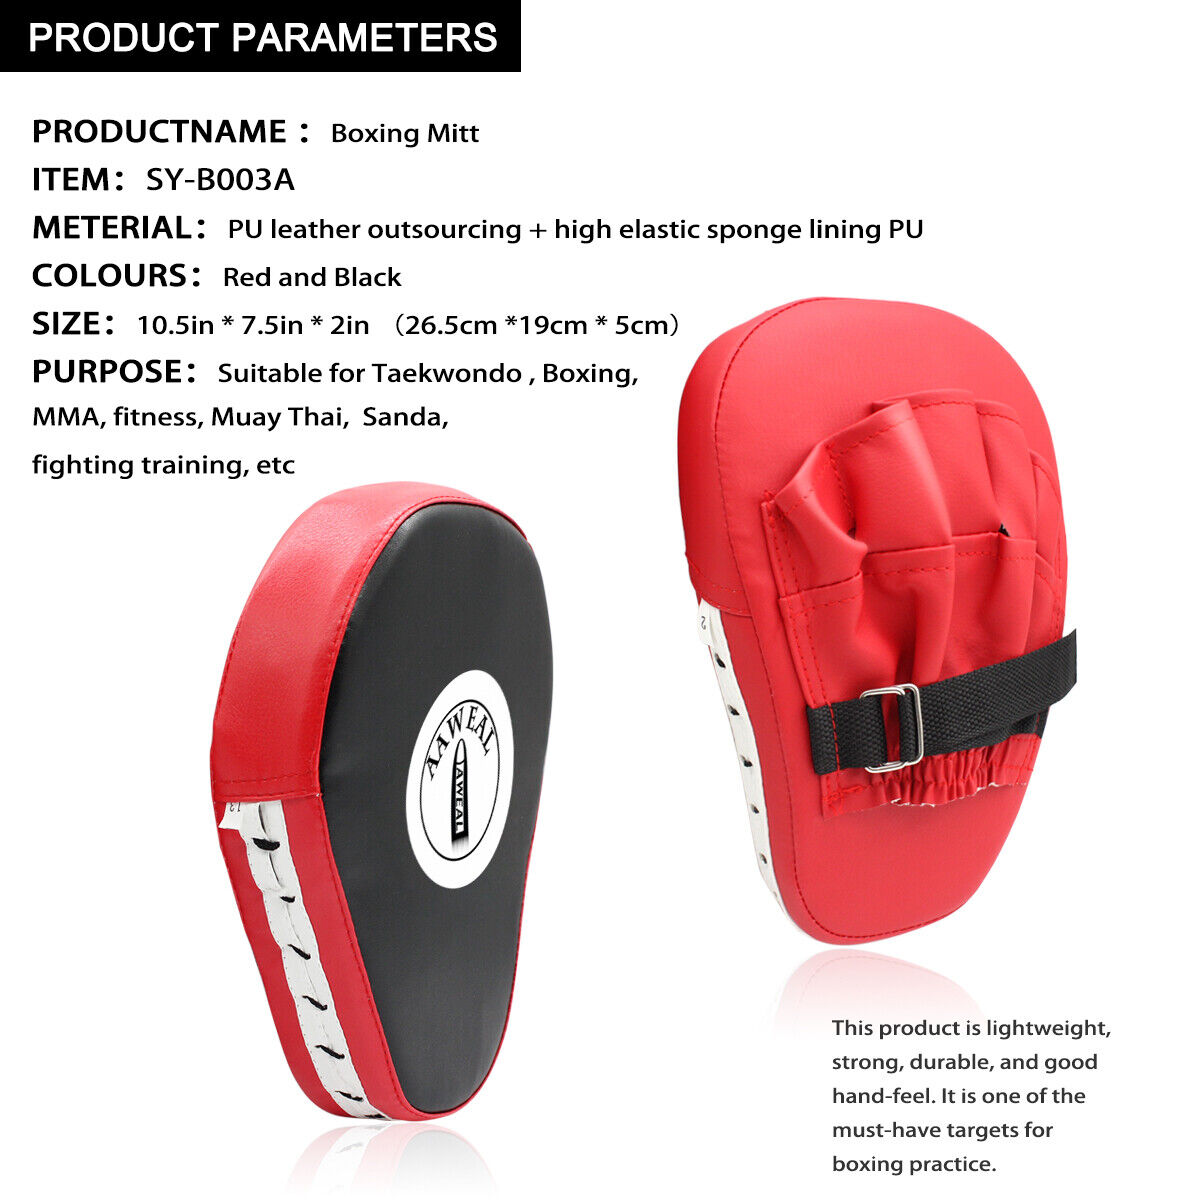 2x Punching Mitts Kickboxing Training Punch MMA Boxing Hand Target Focus Pads Aaweal Does Not Apply - фотография #2